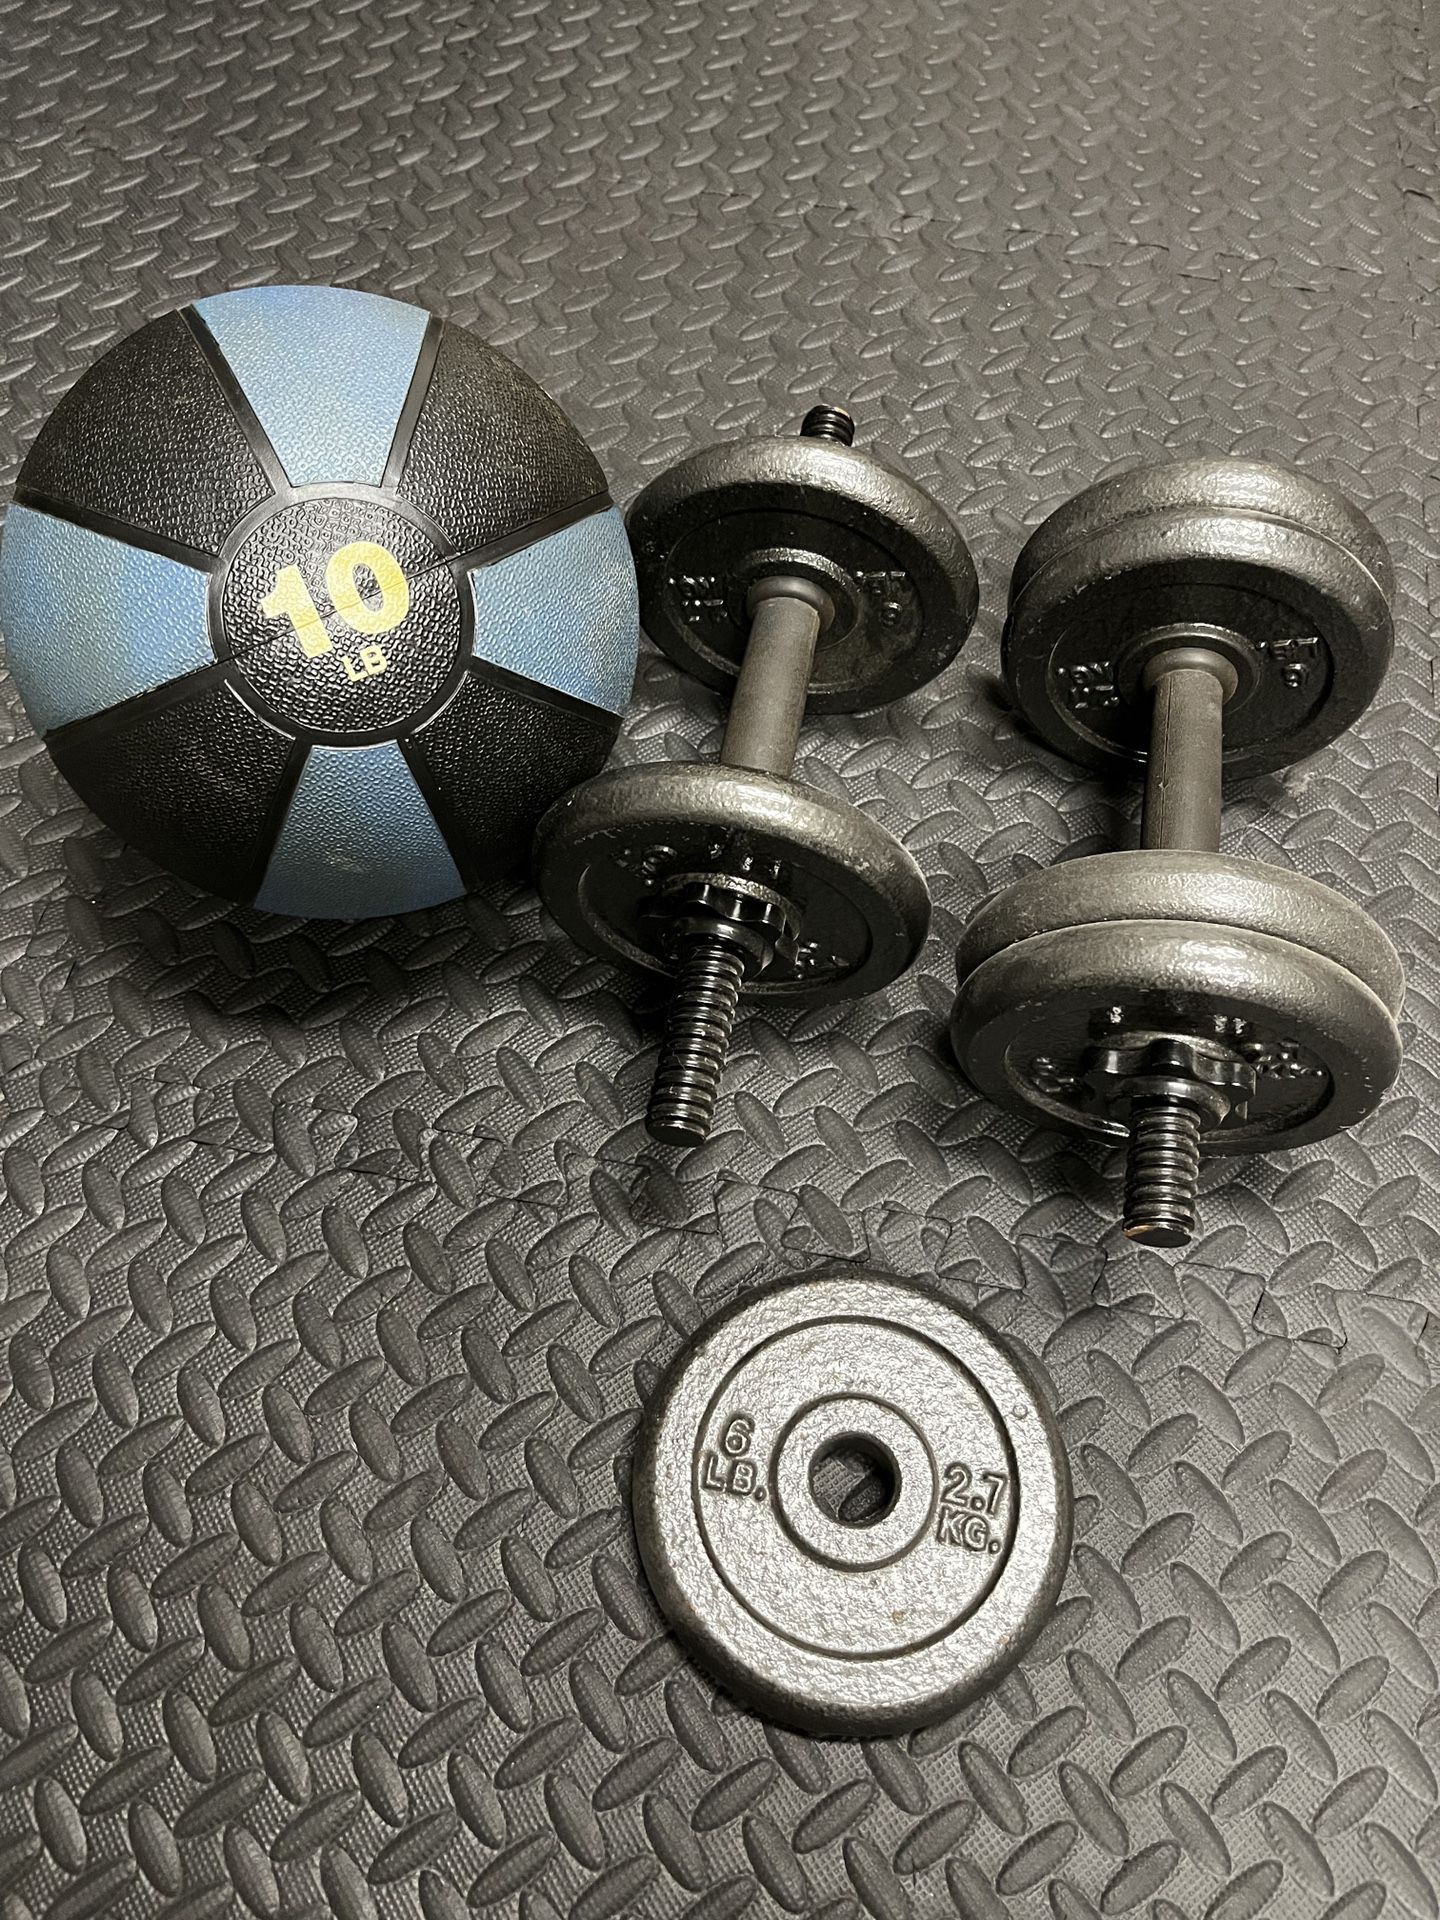 Exercise Ball With Weights 6lb Plates